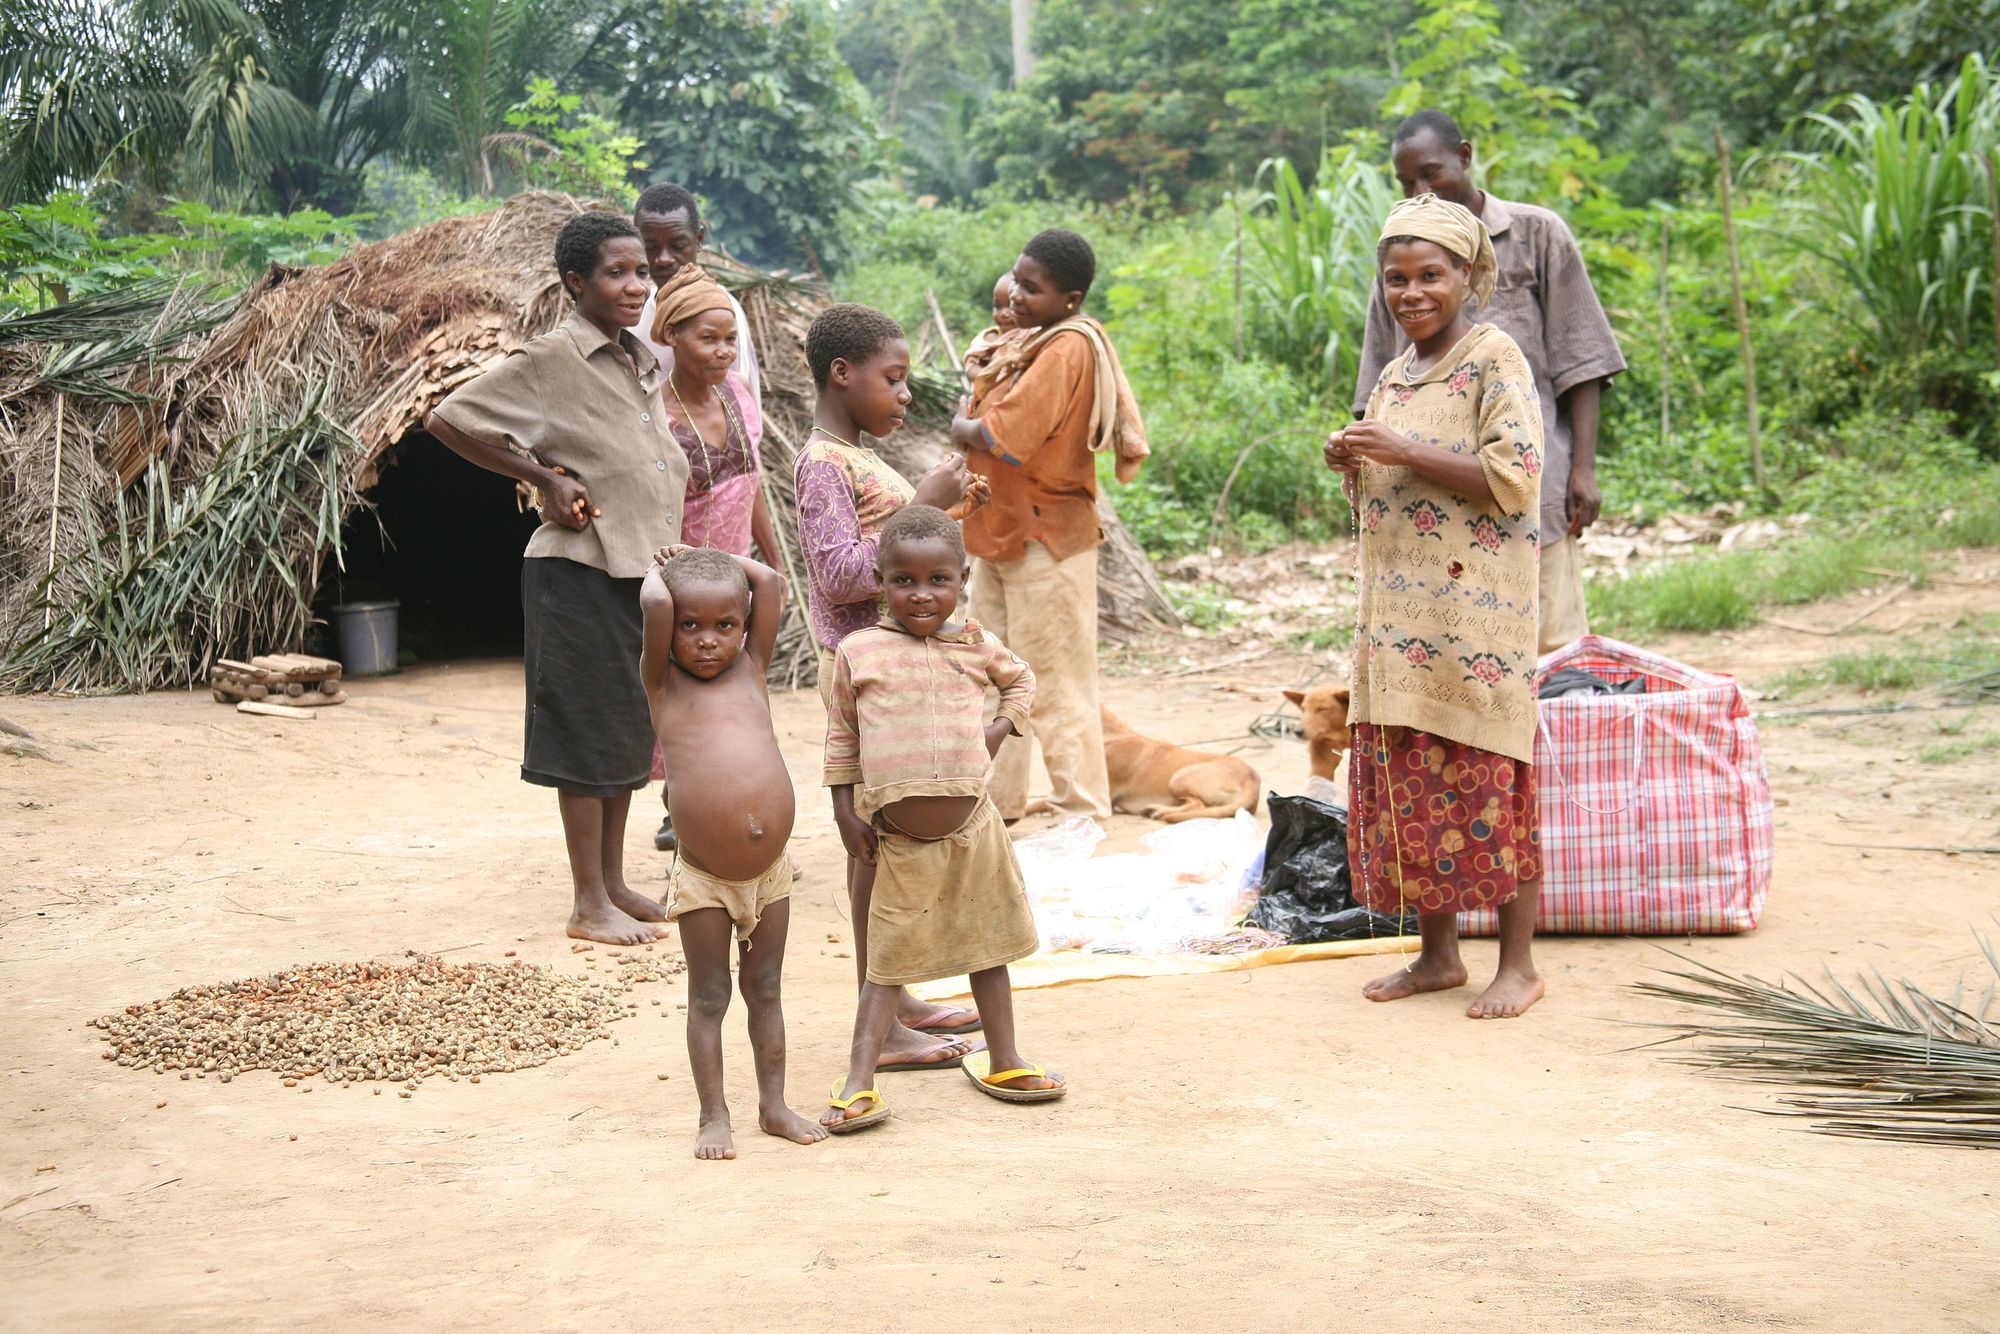 A group of Baka people standing in a rainforest village. In the foreground are two children, and the background a groups of adults. The scene depicts a mixture of modern garments and objects against a backdrop of a traditional hut constructed from local materials.